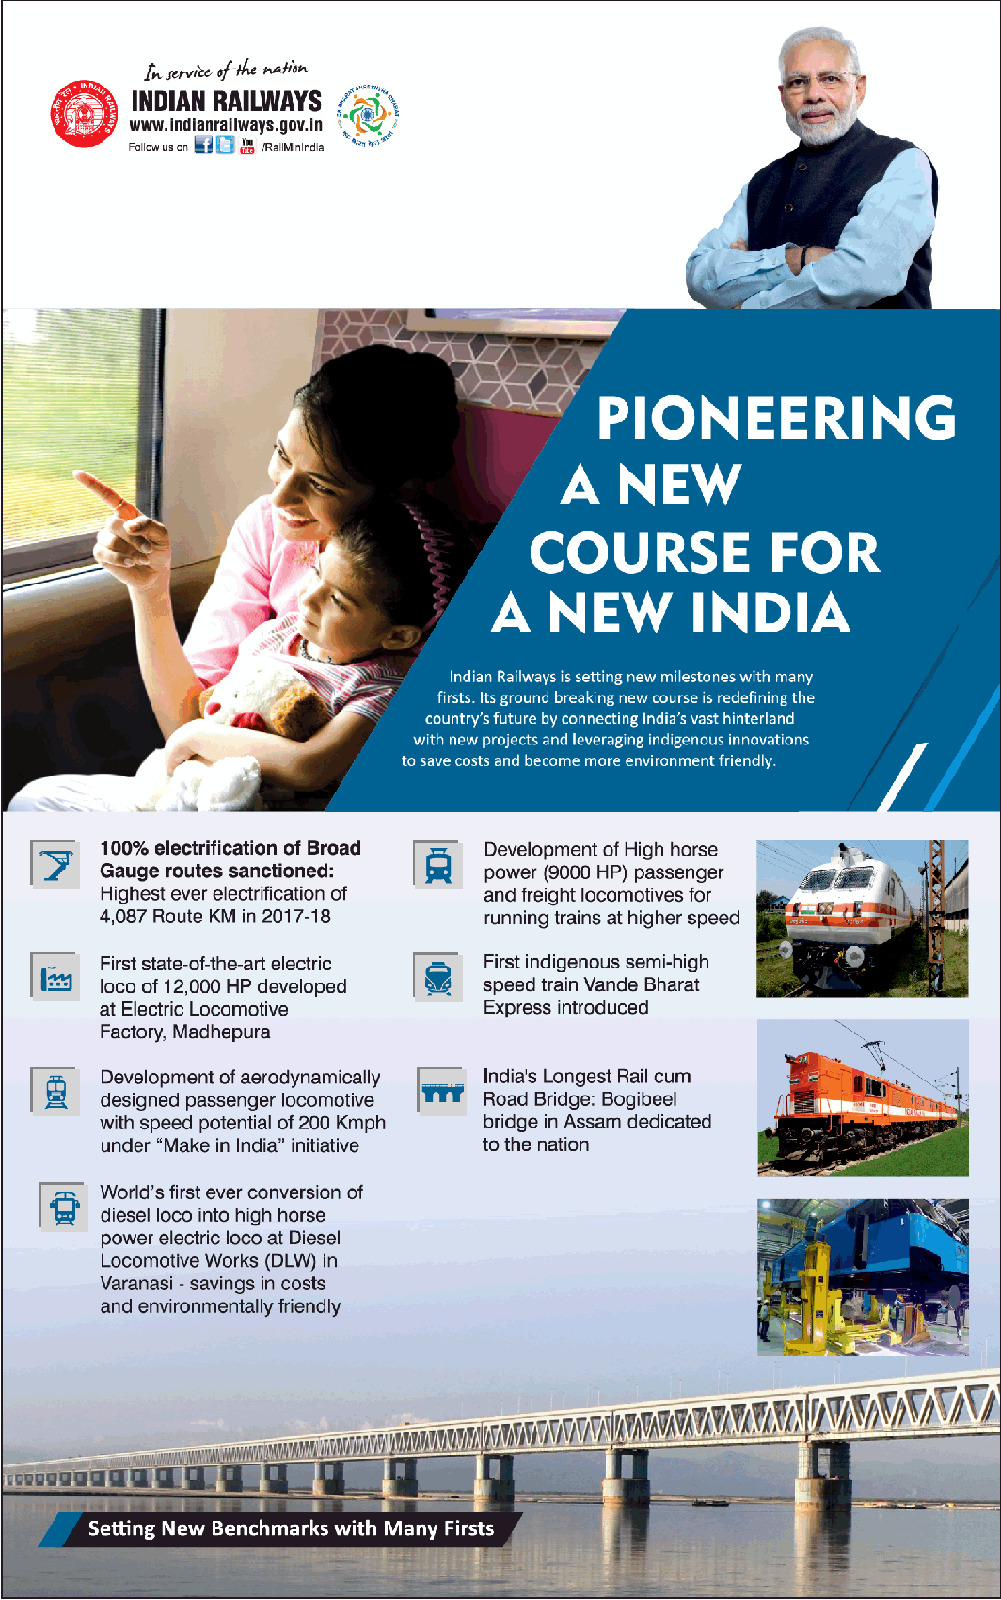 indian-railways-pioneering-a-new-course-for-a-new-india-ad-times-of-india-mumbai-22-02-2019.png